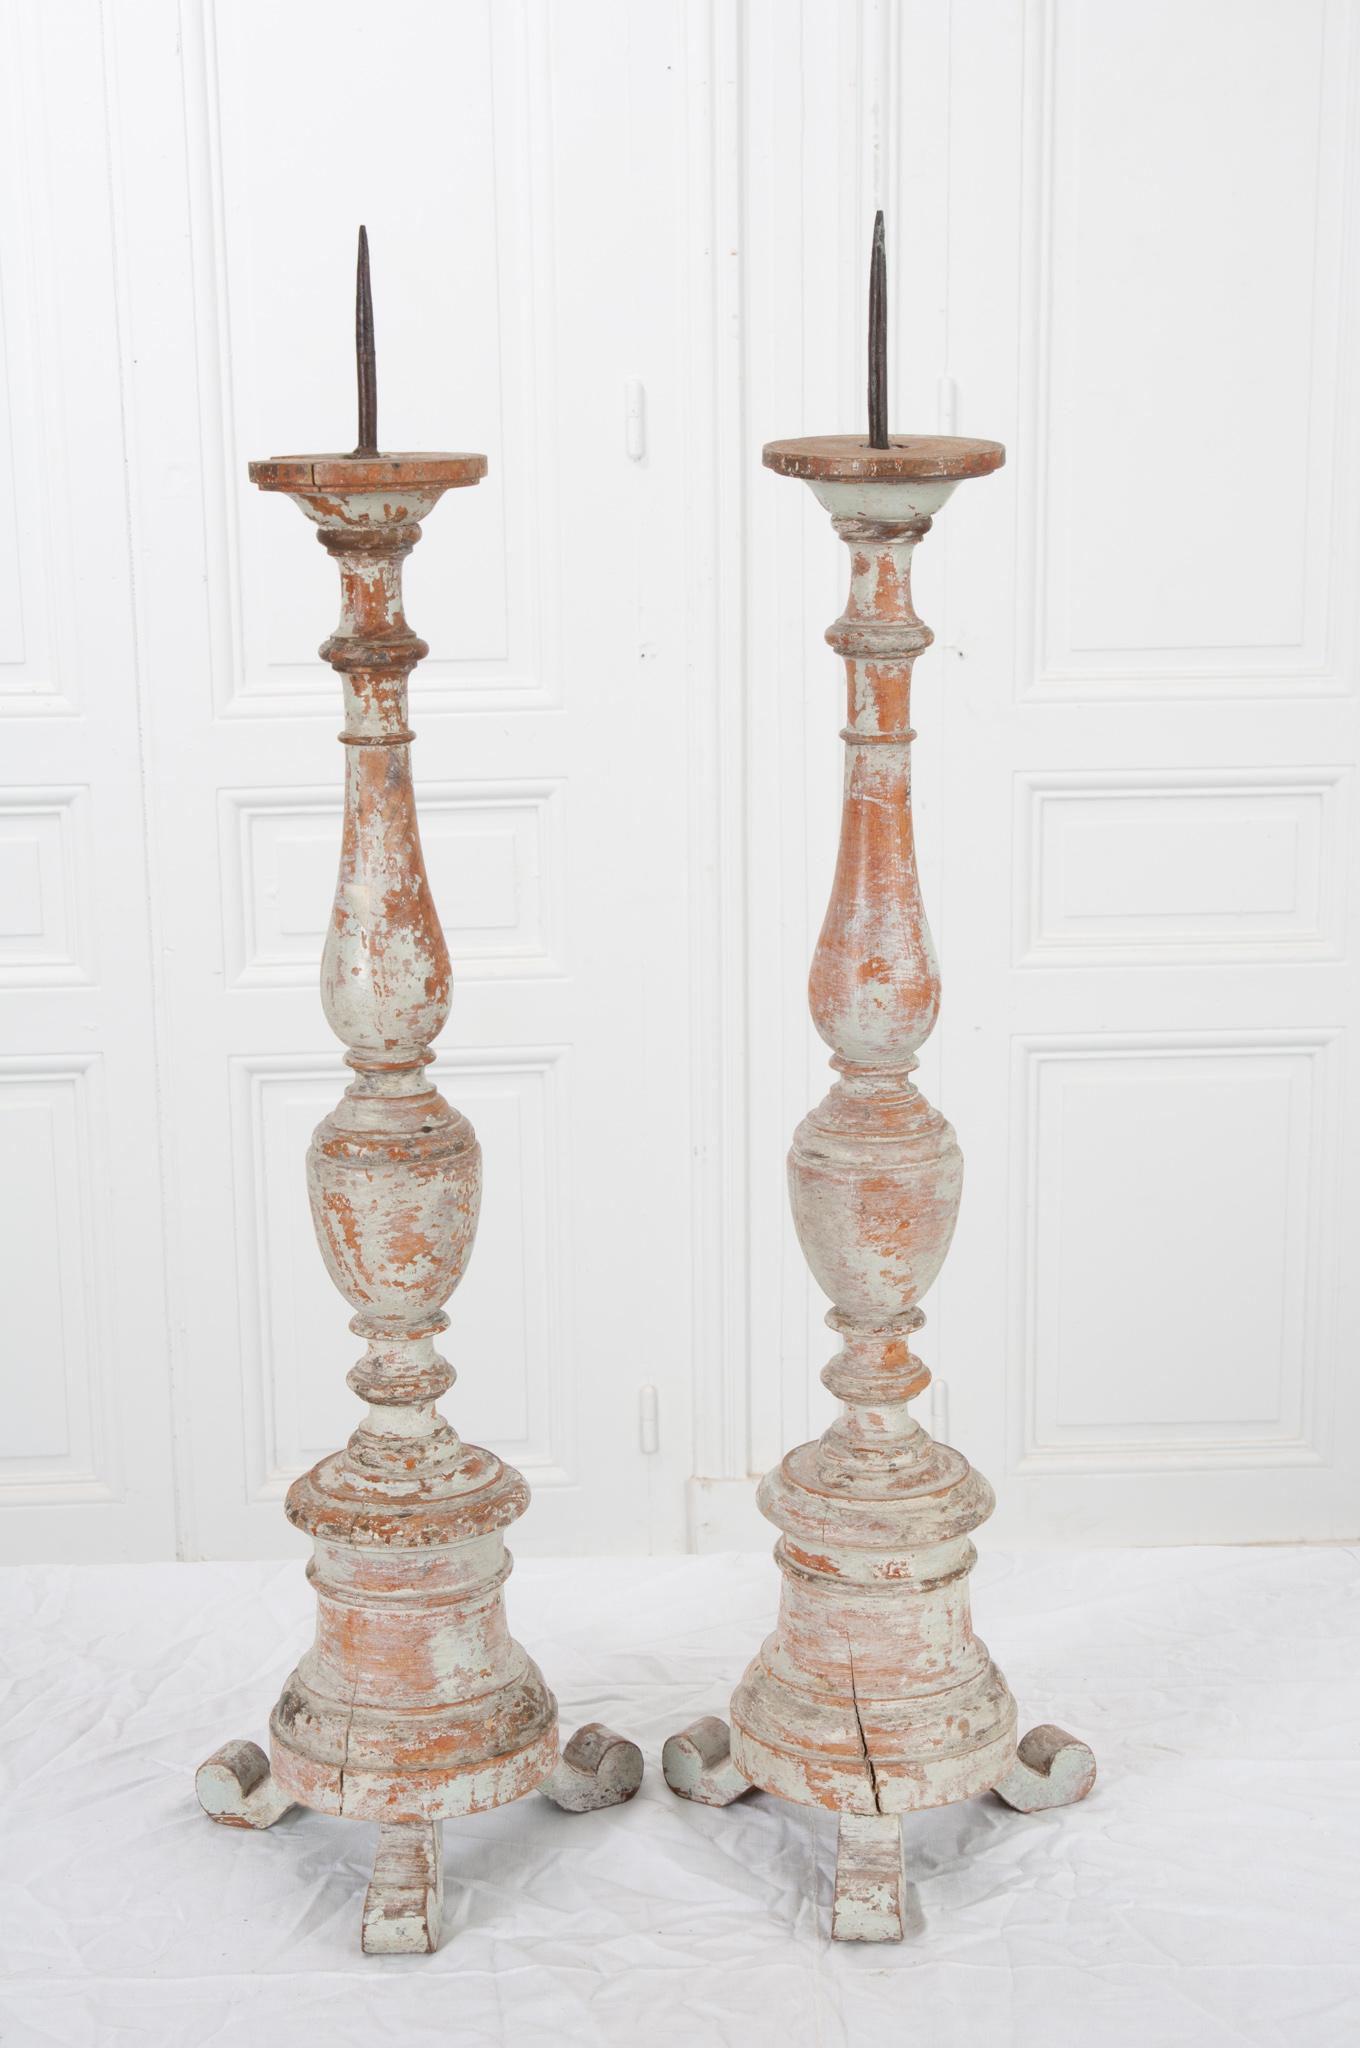 This attractive pair of French candlesticks were made in the late 1800’s. The impressively turned wood still features the original paint, worn over the years giving them a great patina. Iron spikes will hold your candle of choice securely in place.